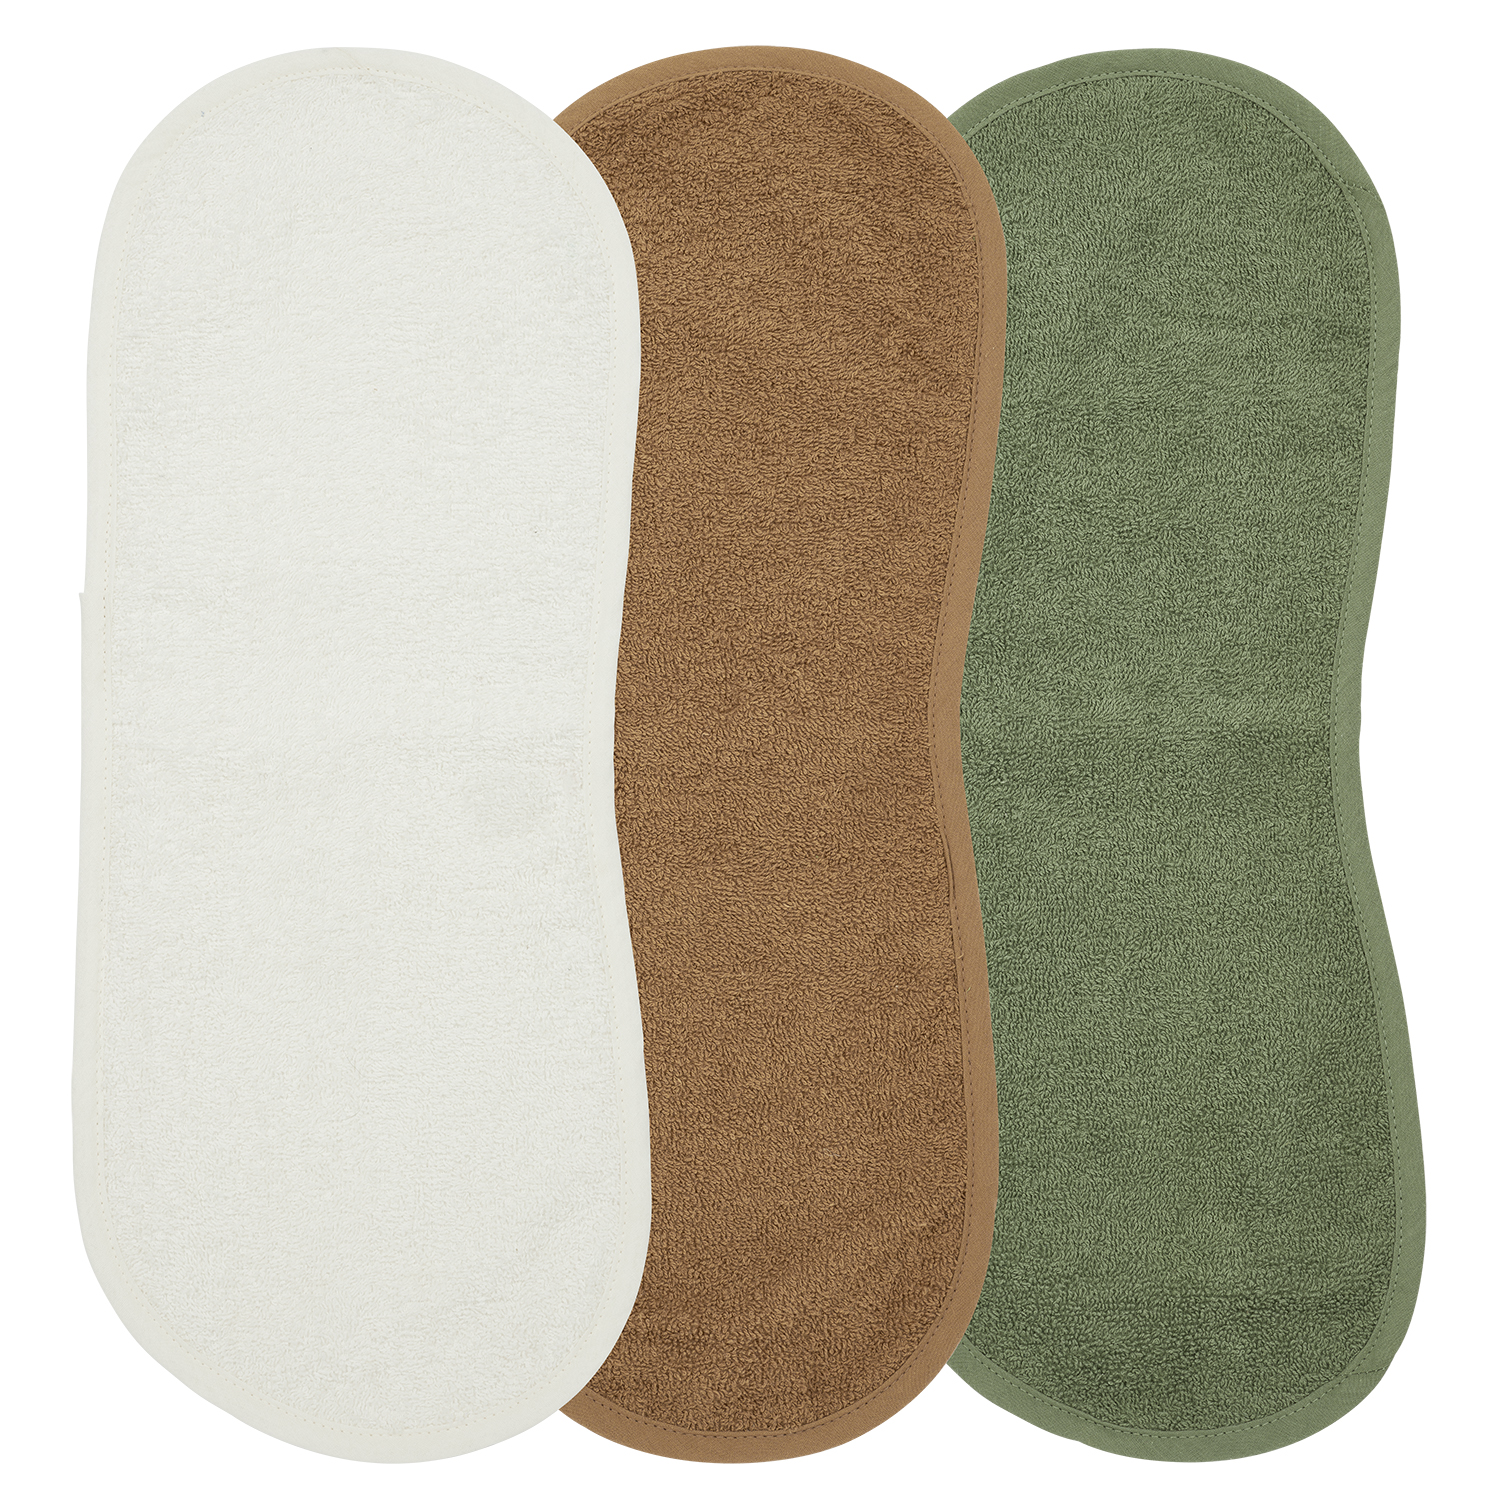 Spucktuch 3er pack frottee Uni - offwhite/toffee/forest green - 53x20cm